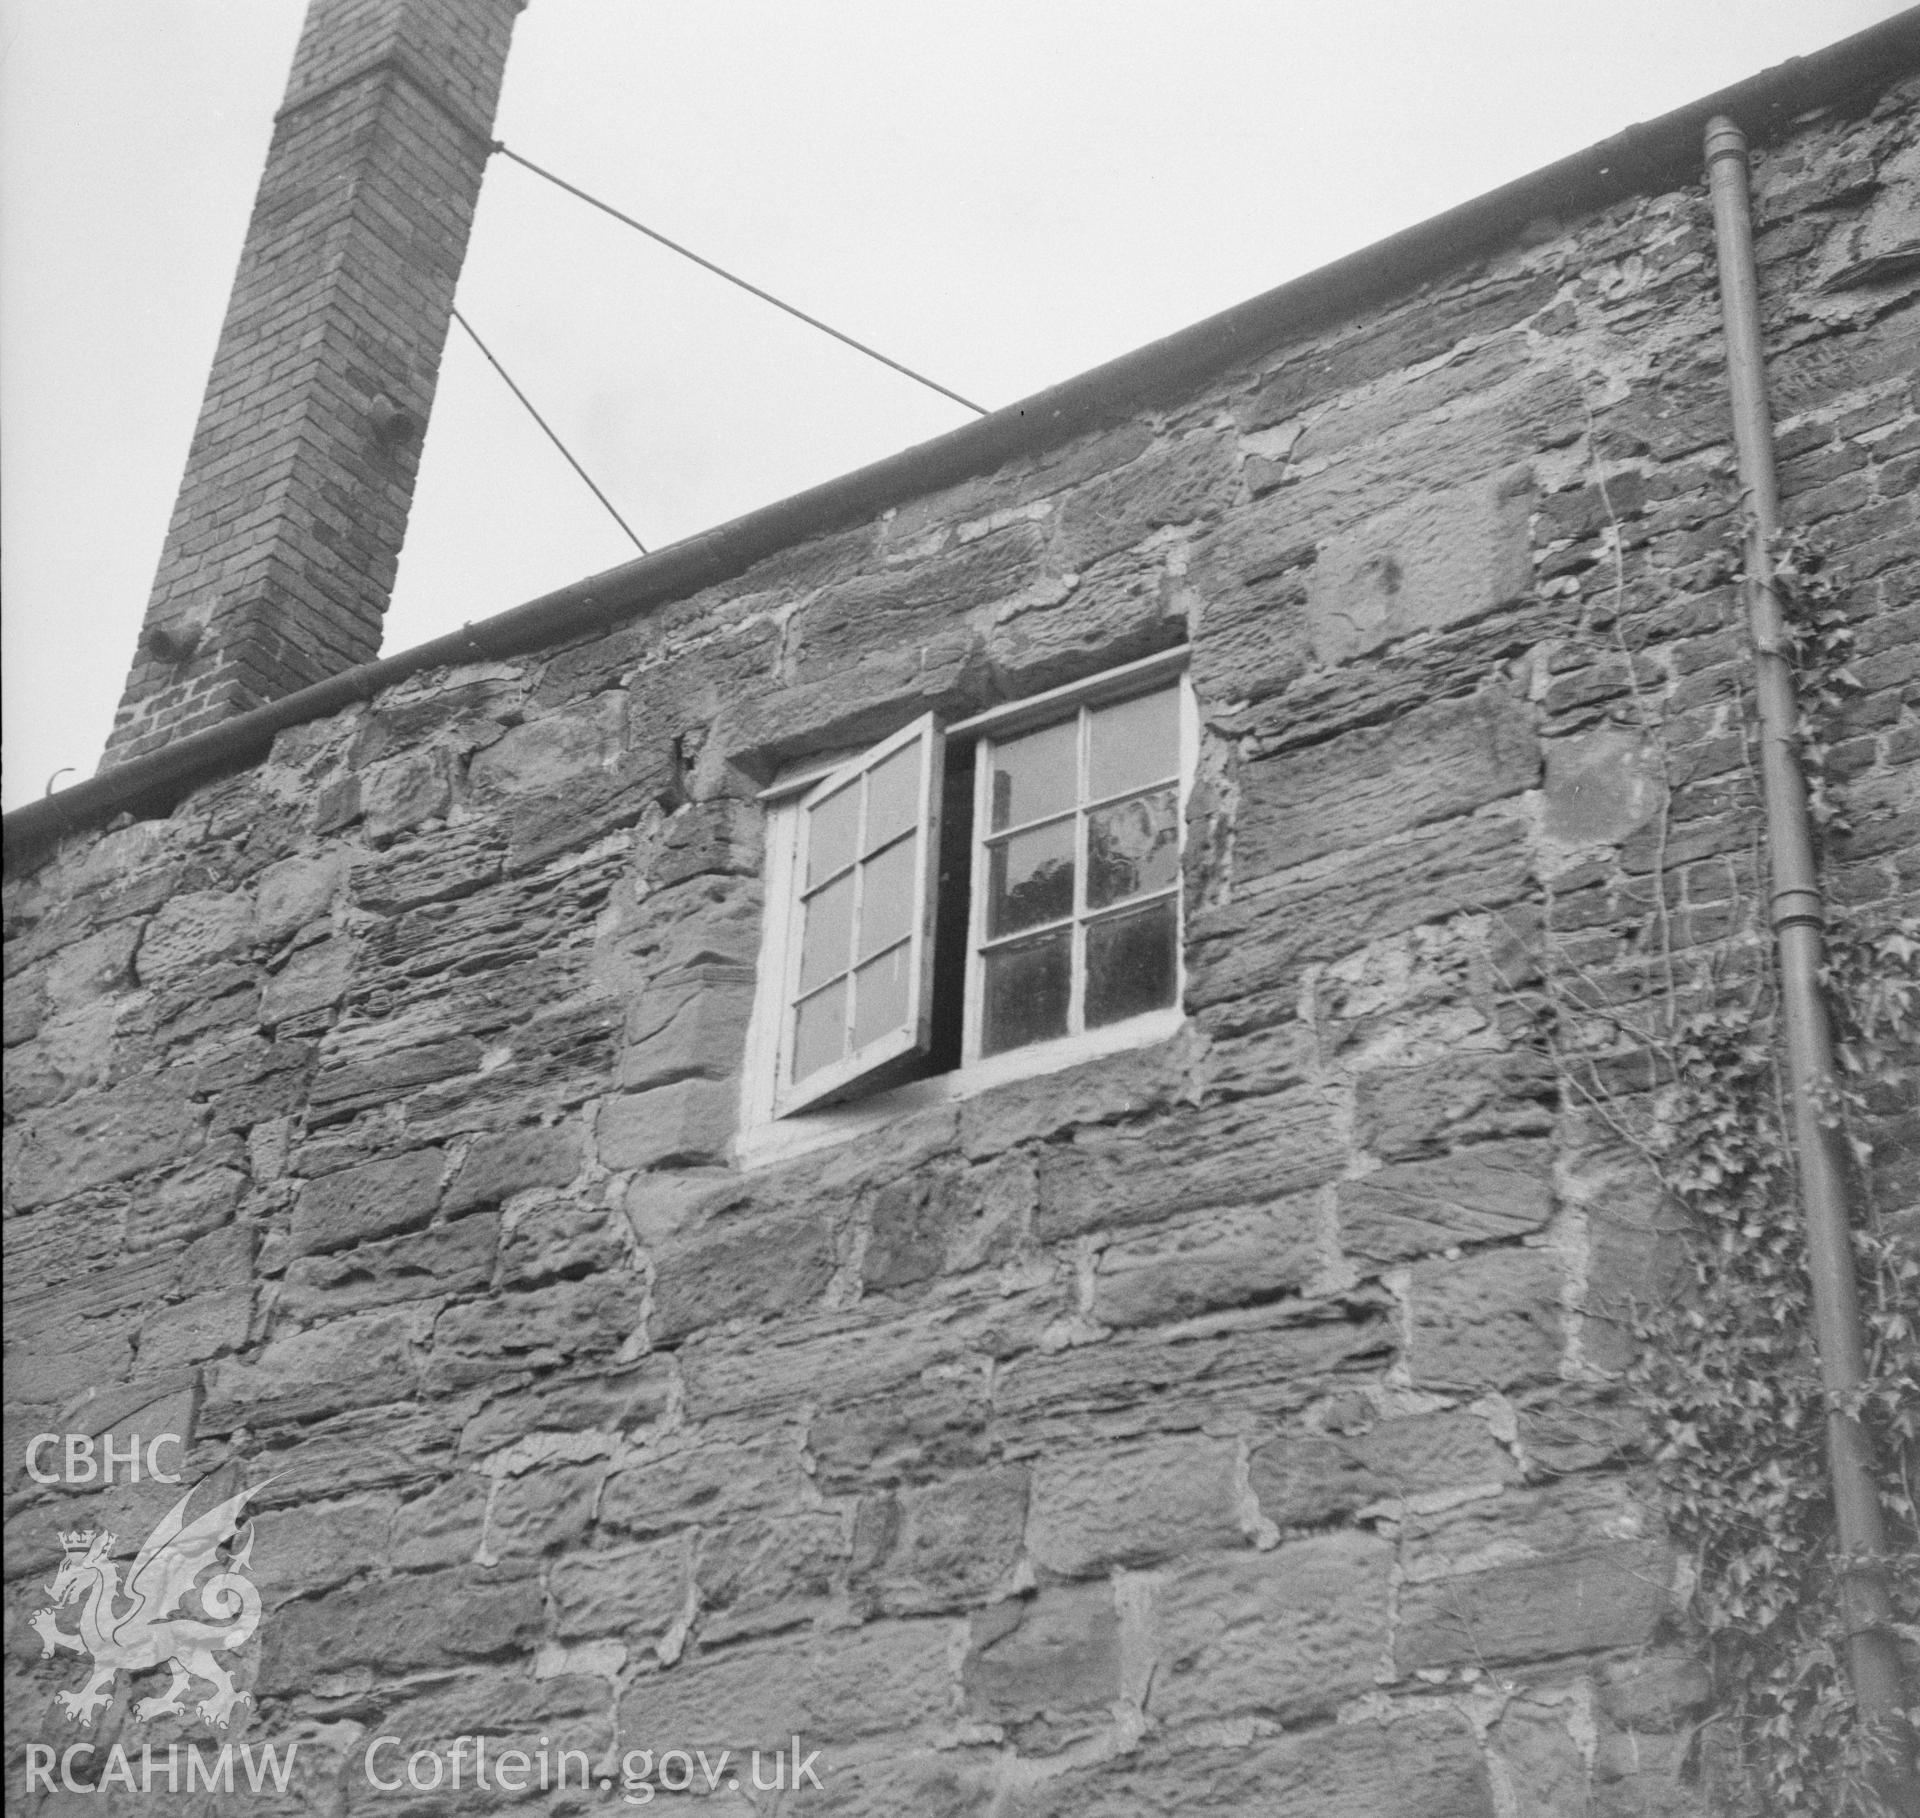 Digital copy of a black and white nitrate negative, exterior window detail at Llyseurgain.